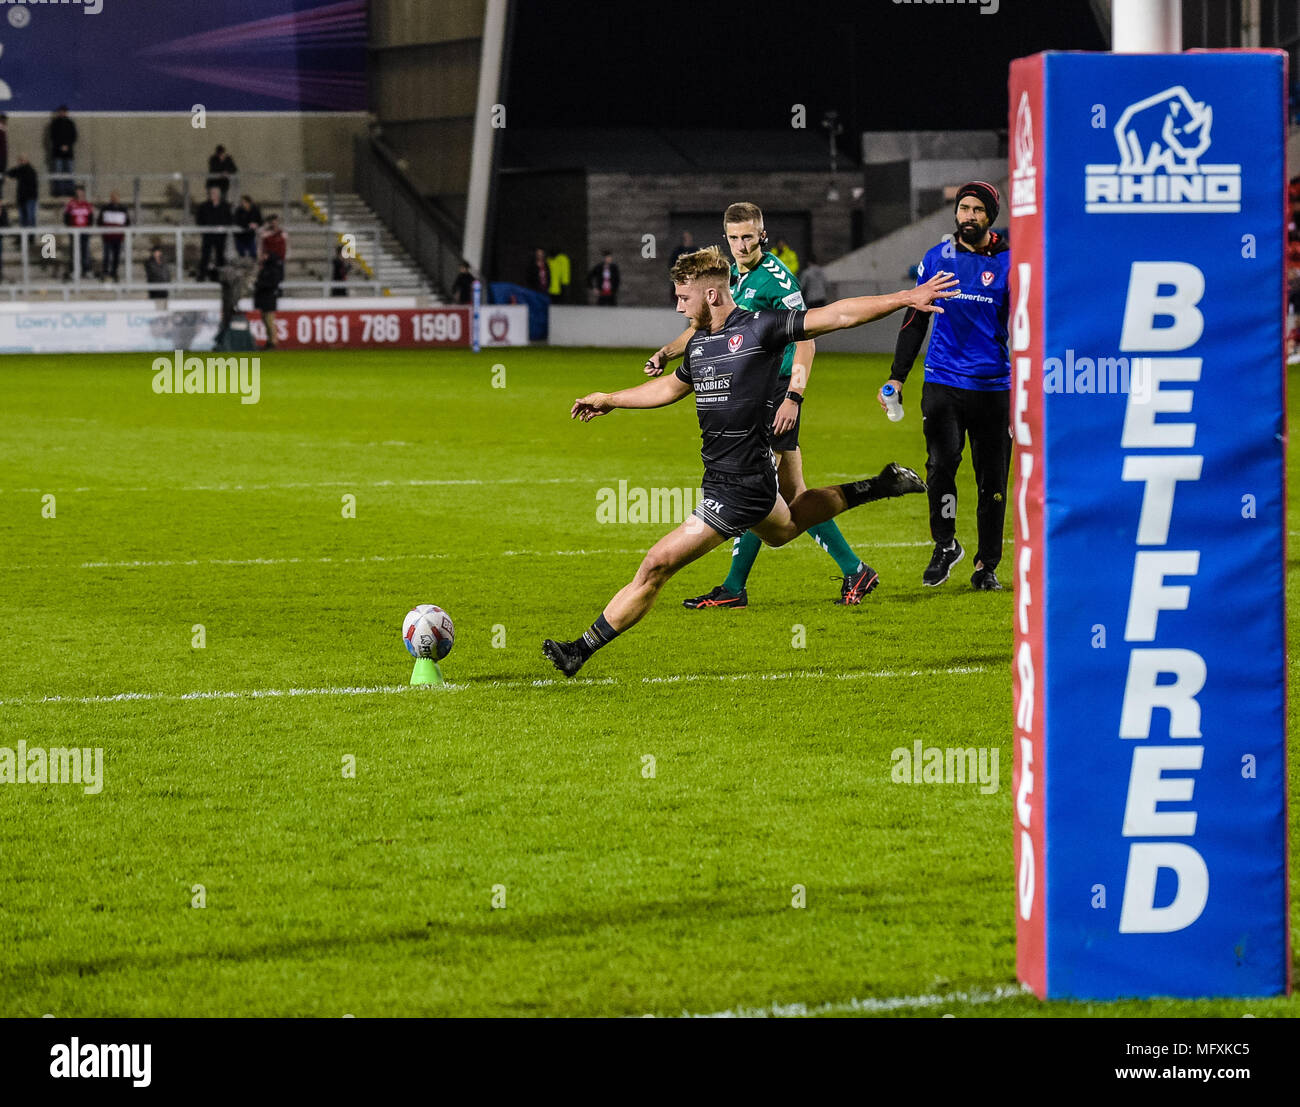 Manchester, Regno Unito. Il 26 aprile 2018 , AJ Bell Stadium, Manchester, Inghilterra; Betfred Super League Rugby, Round 13, Salford Red Devils v St Helens ; Danny Richardson di St Helens converte Credito: News immagini /Alamy Live News Foto Stock